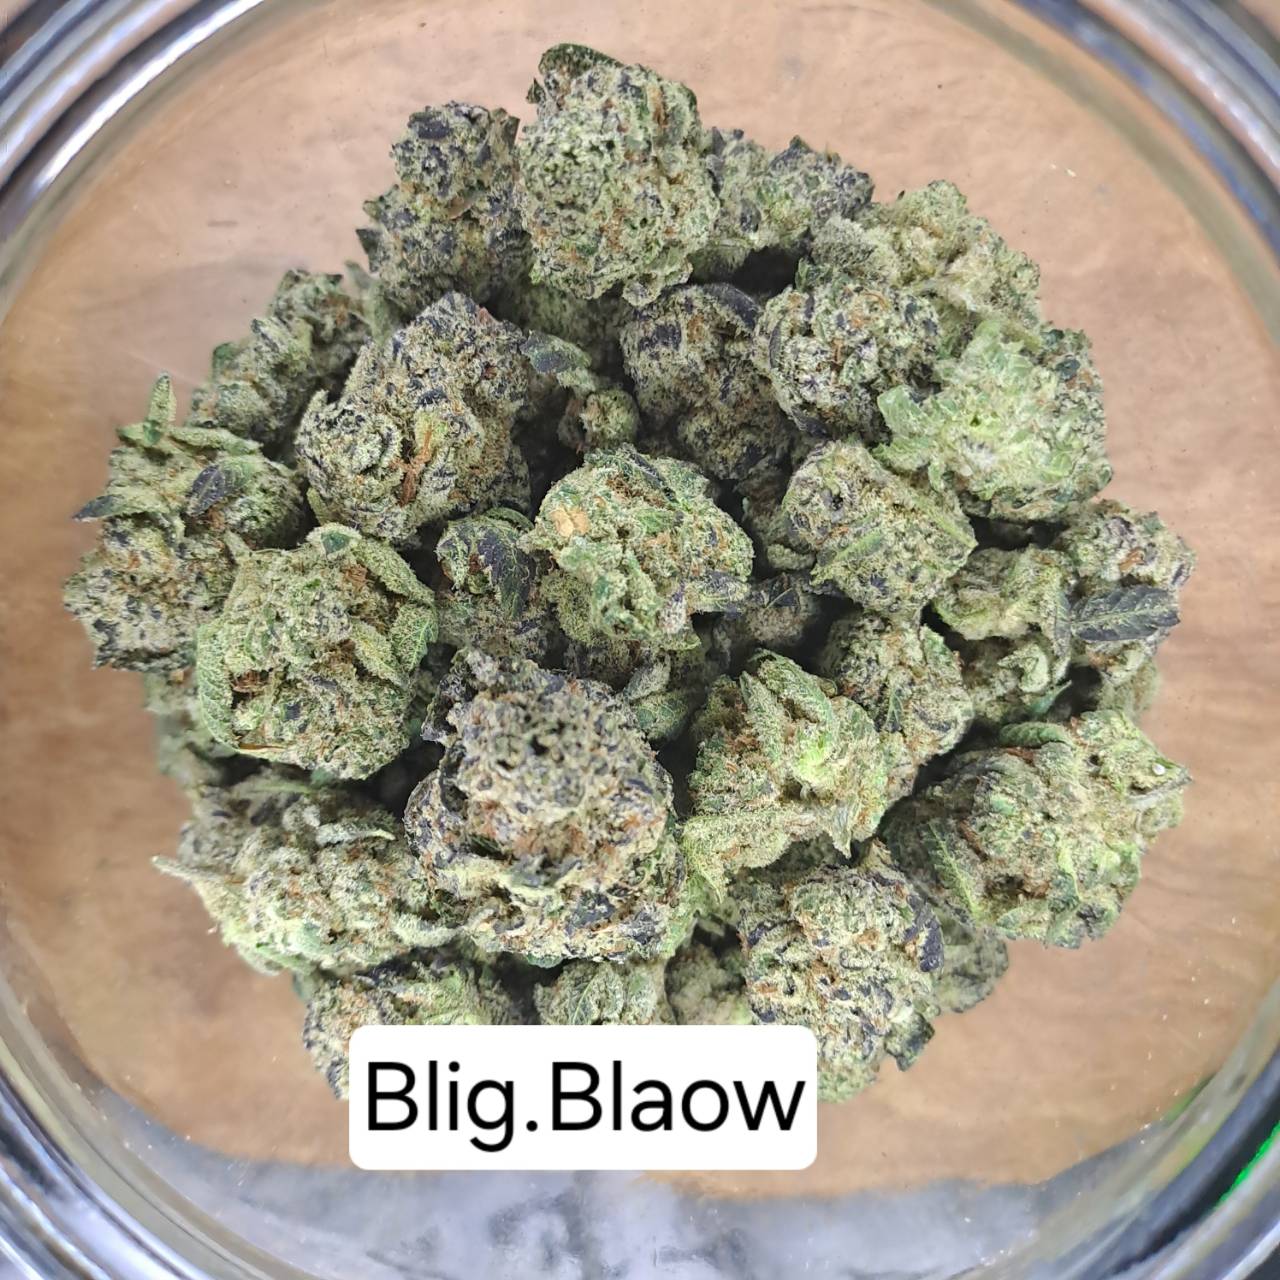 Product Image for Le Blig Blaow